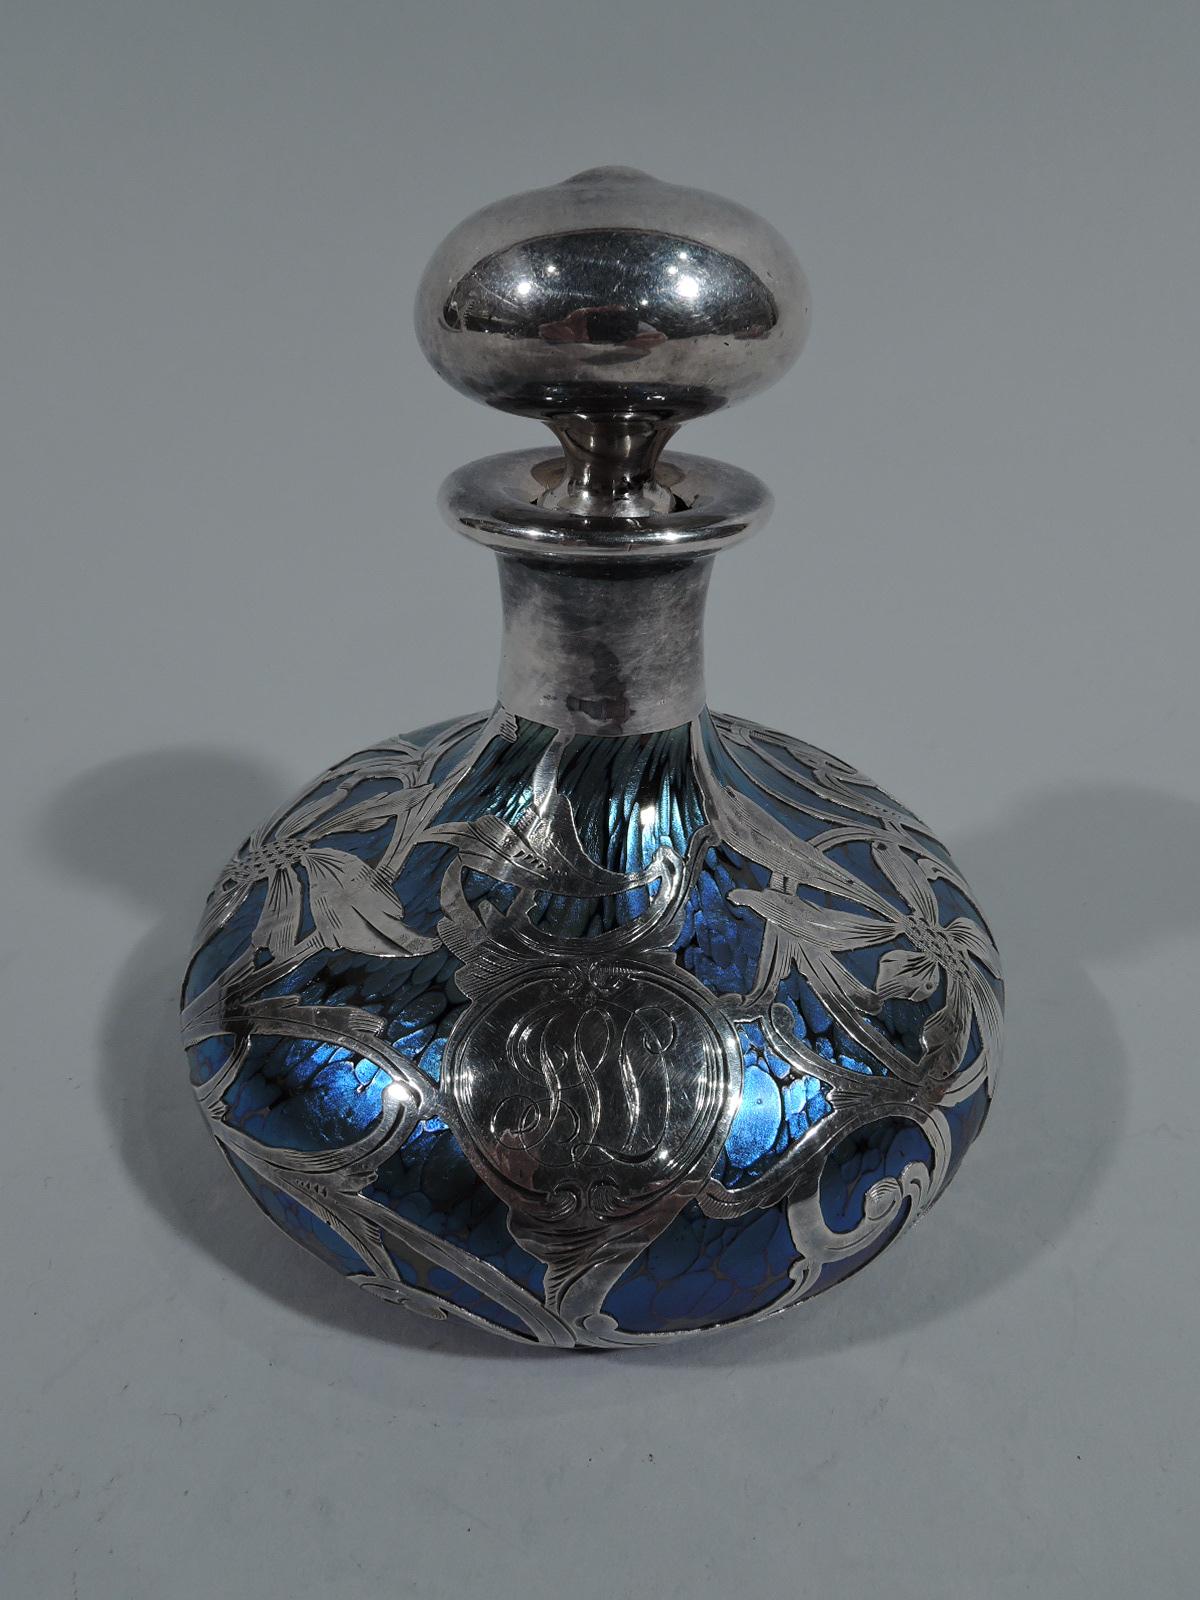 Art Nouveau iridescent glass perfume by historic maker Loetz, circa 1900. Bellied bowl and short neck with flat rim. Silver ball stopper with short clear glass plug. Glass is veined and mottled iridescent blue. Loose floral silver overlay with big